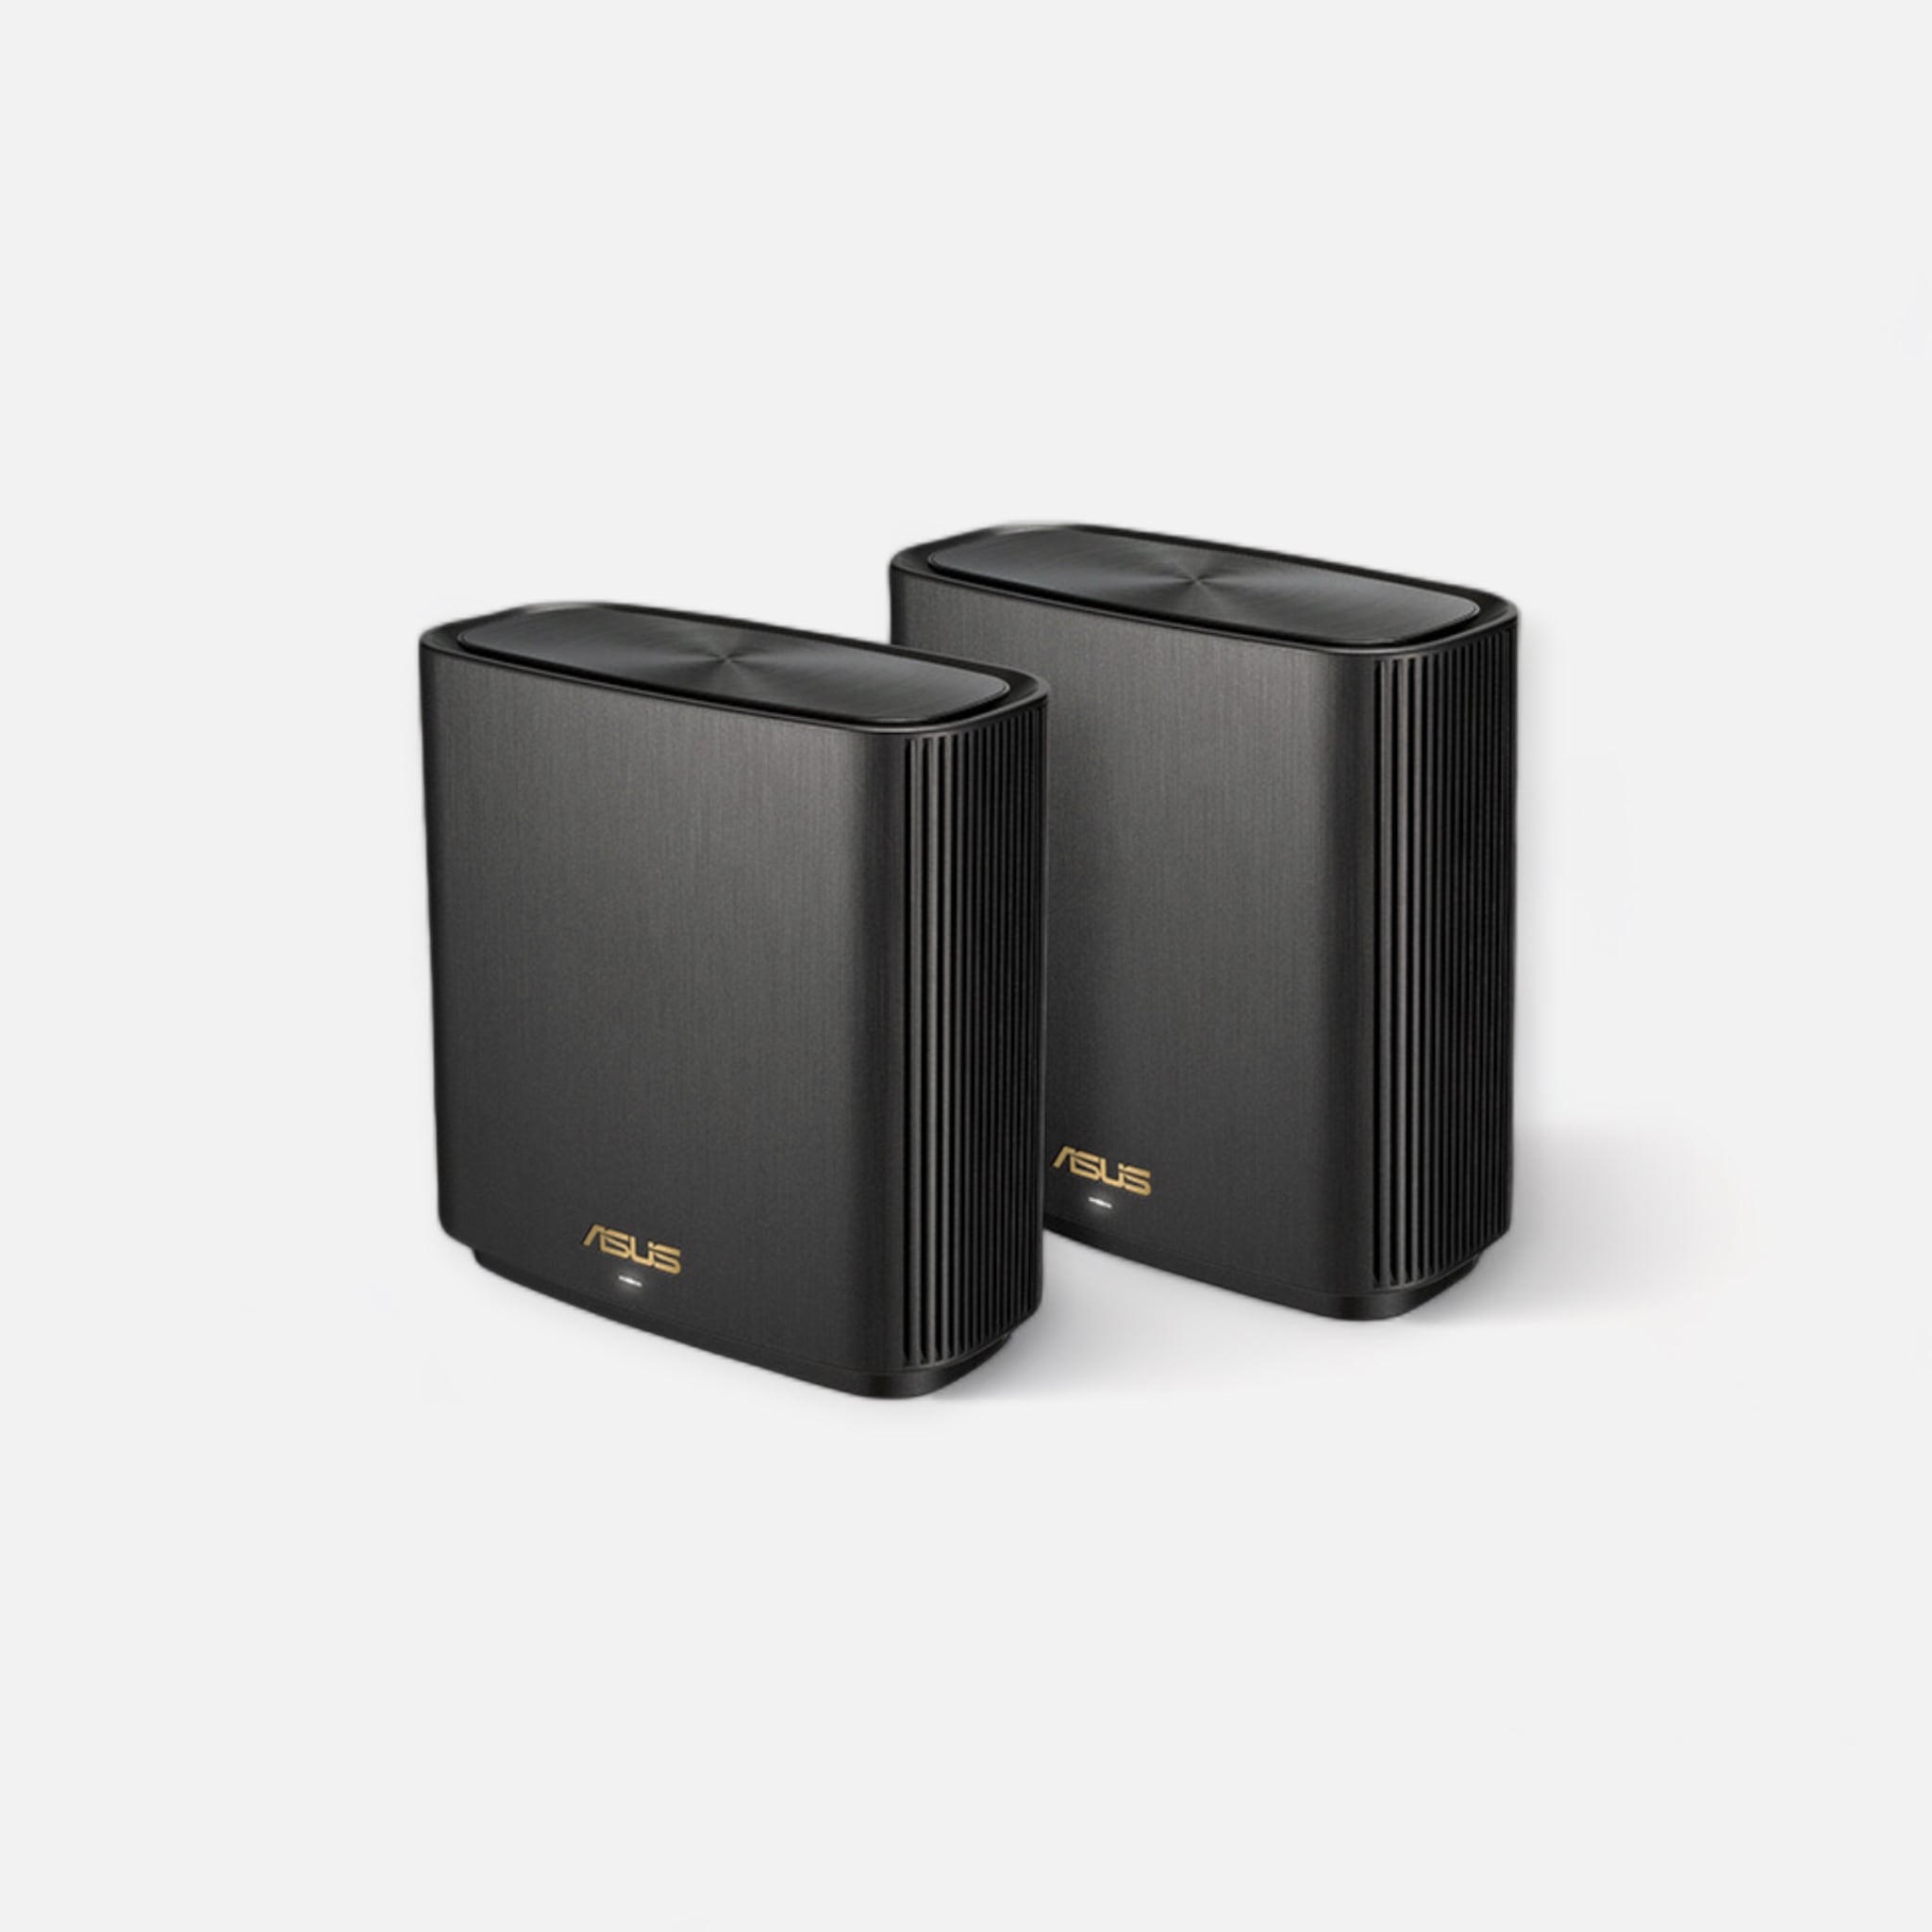 Asus XT8 router twin pack